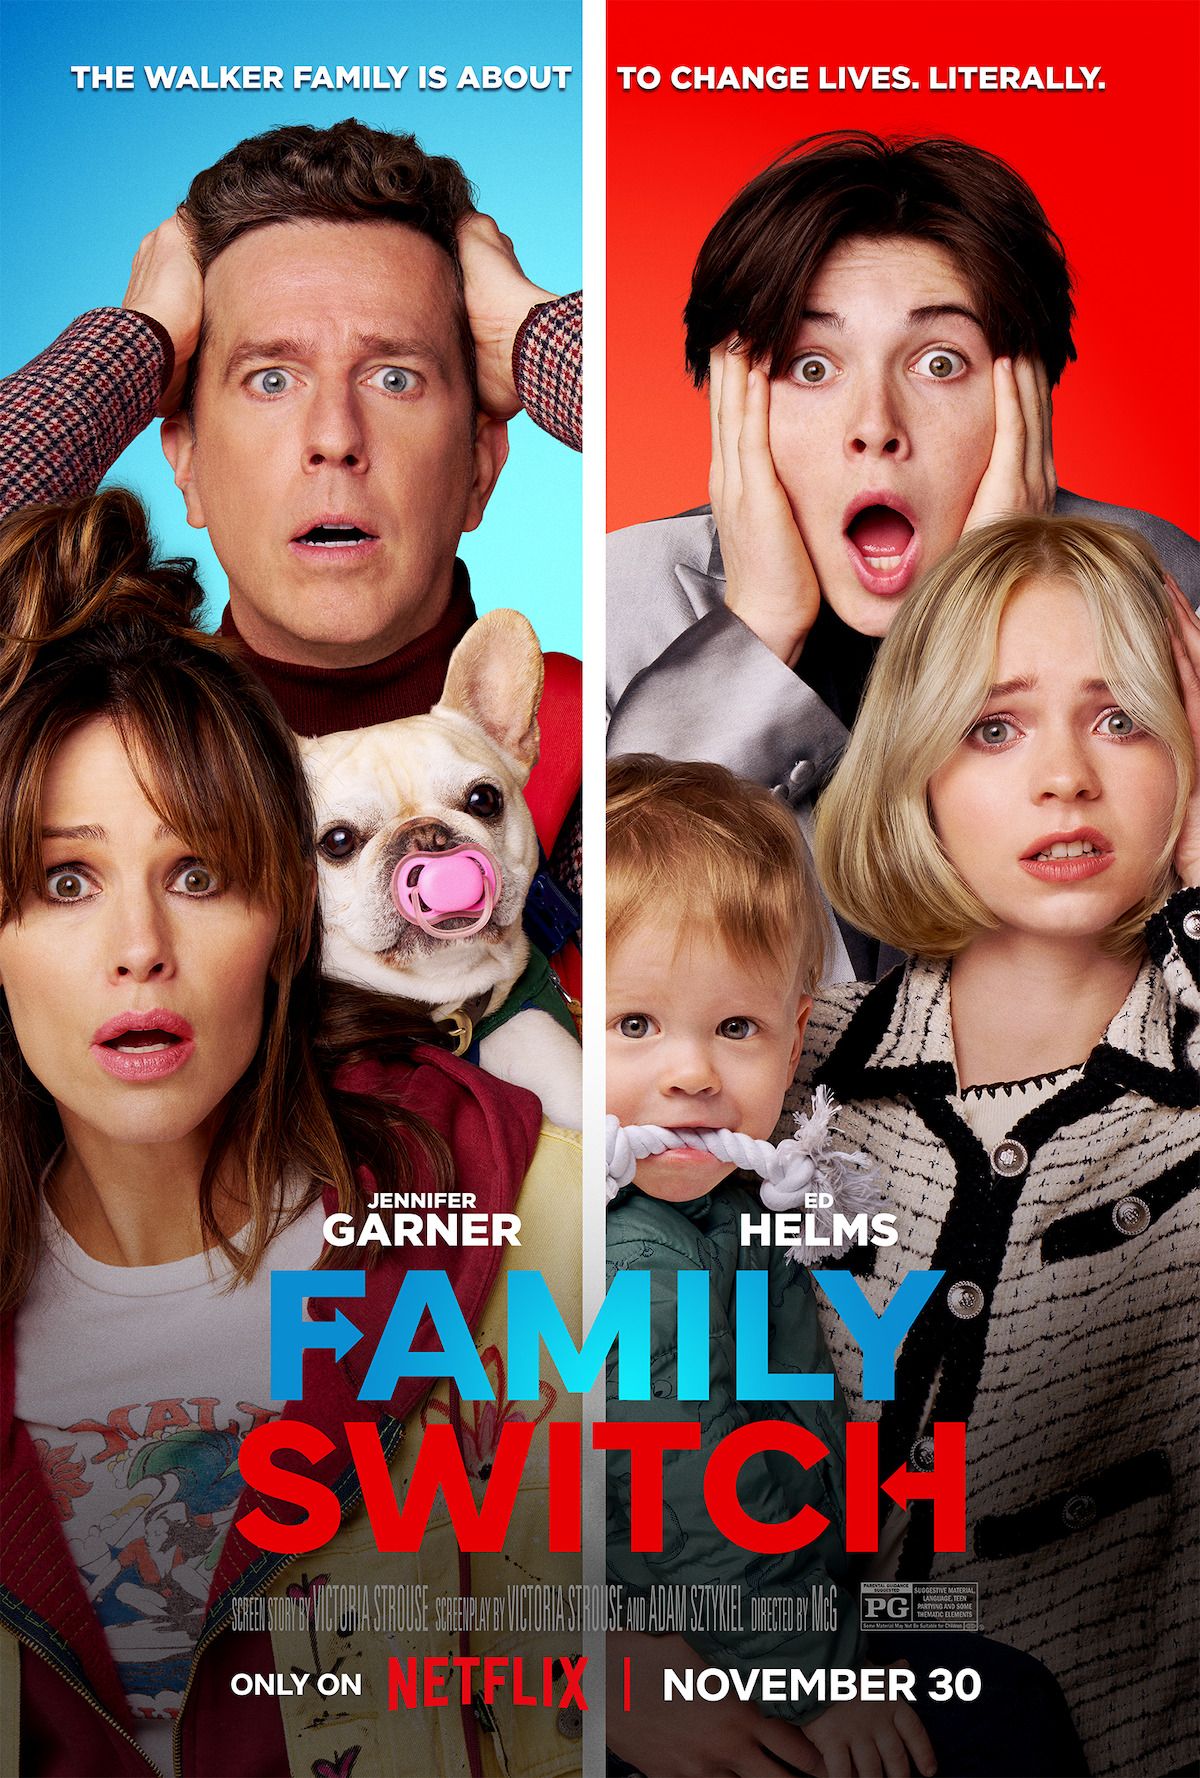 The poster for Family Switch with Ed Helms, Jennifer Garner, Emma Myers, and Brady Noon